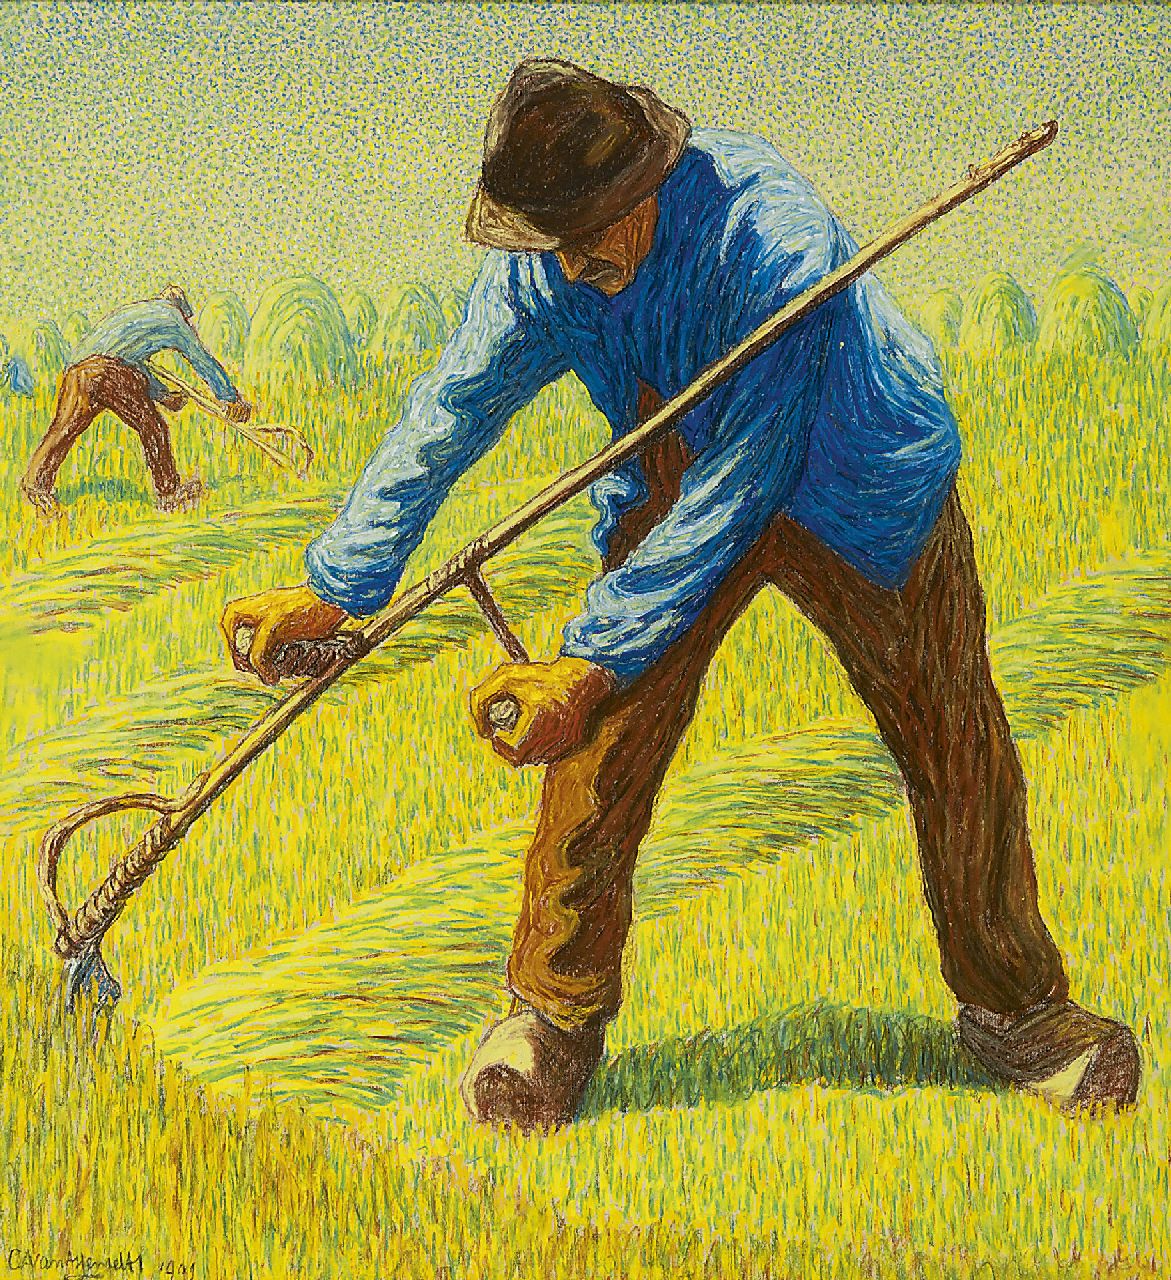 Assendelft C.A. van | Cornelis Albert van Assendelft, The mower, coloured chalk and pastel on paper 60.0 x 55.8 cm, signed l.l. and dated 1909